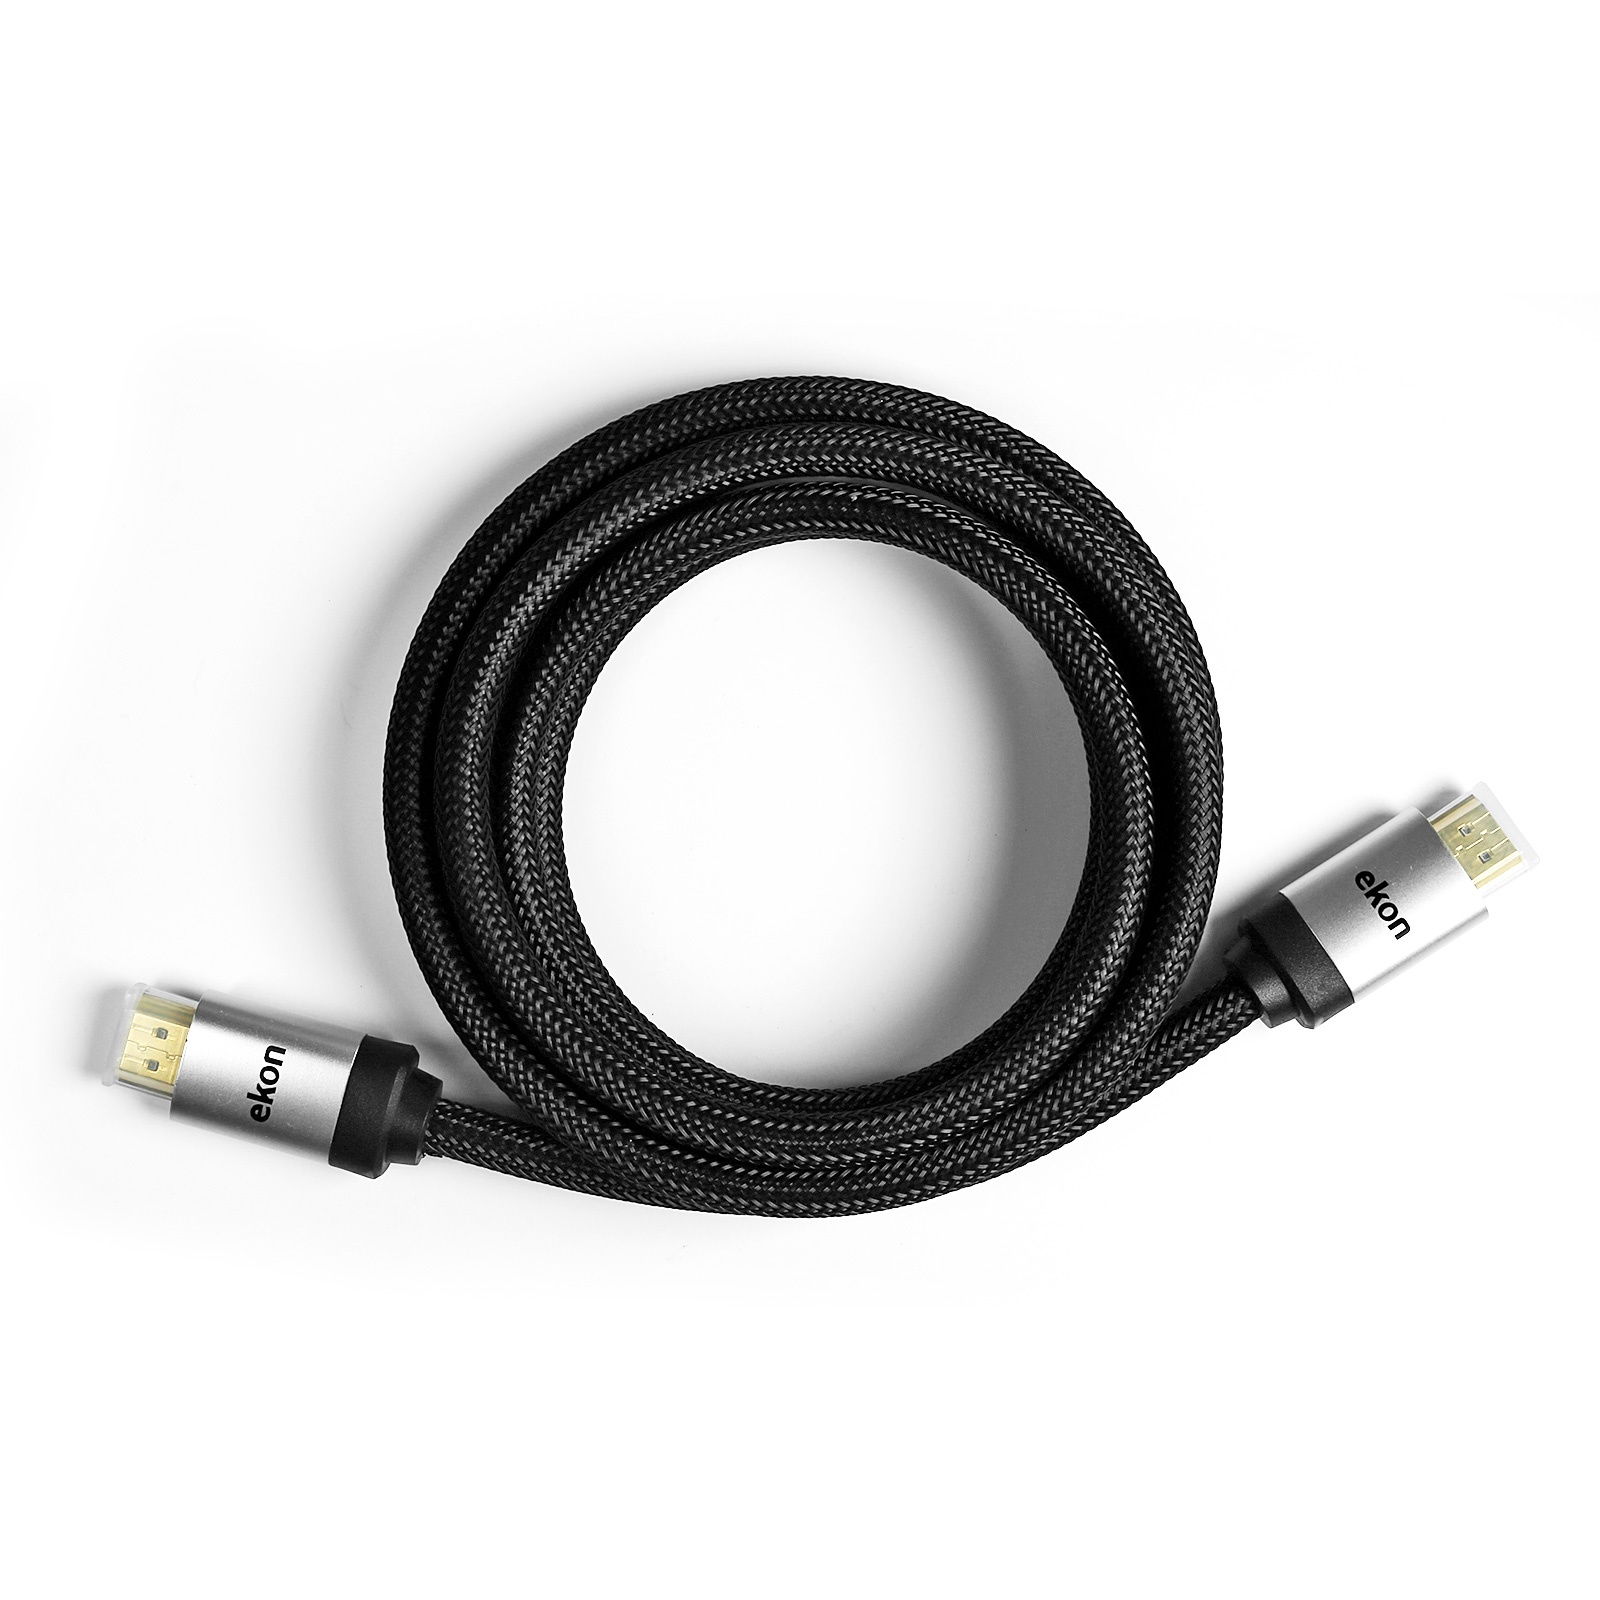 EKON HDMI V 2.0 cable male to male high speed with ethernet, 4K. OD 7.3mm.  Conductor pure copper,28 AWG, jacket with cotton. Connector metal shell and gold plated. Shielding: Al-foil with al-mg braid. + ferrite core. Total Lenght 1,8 mt